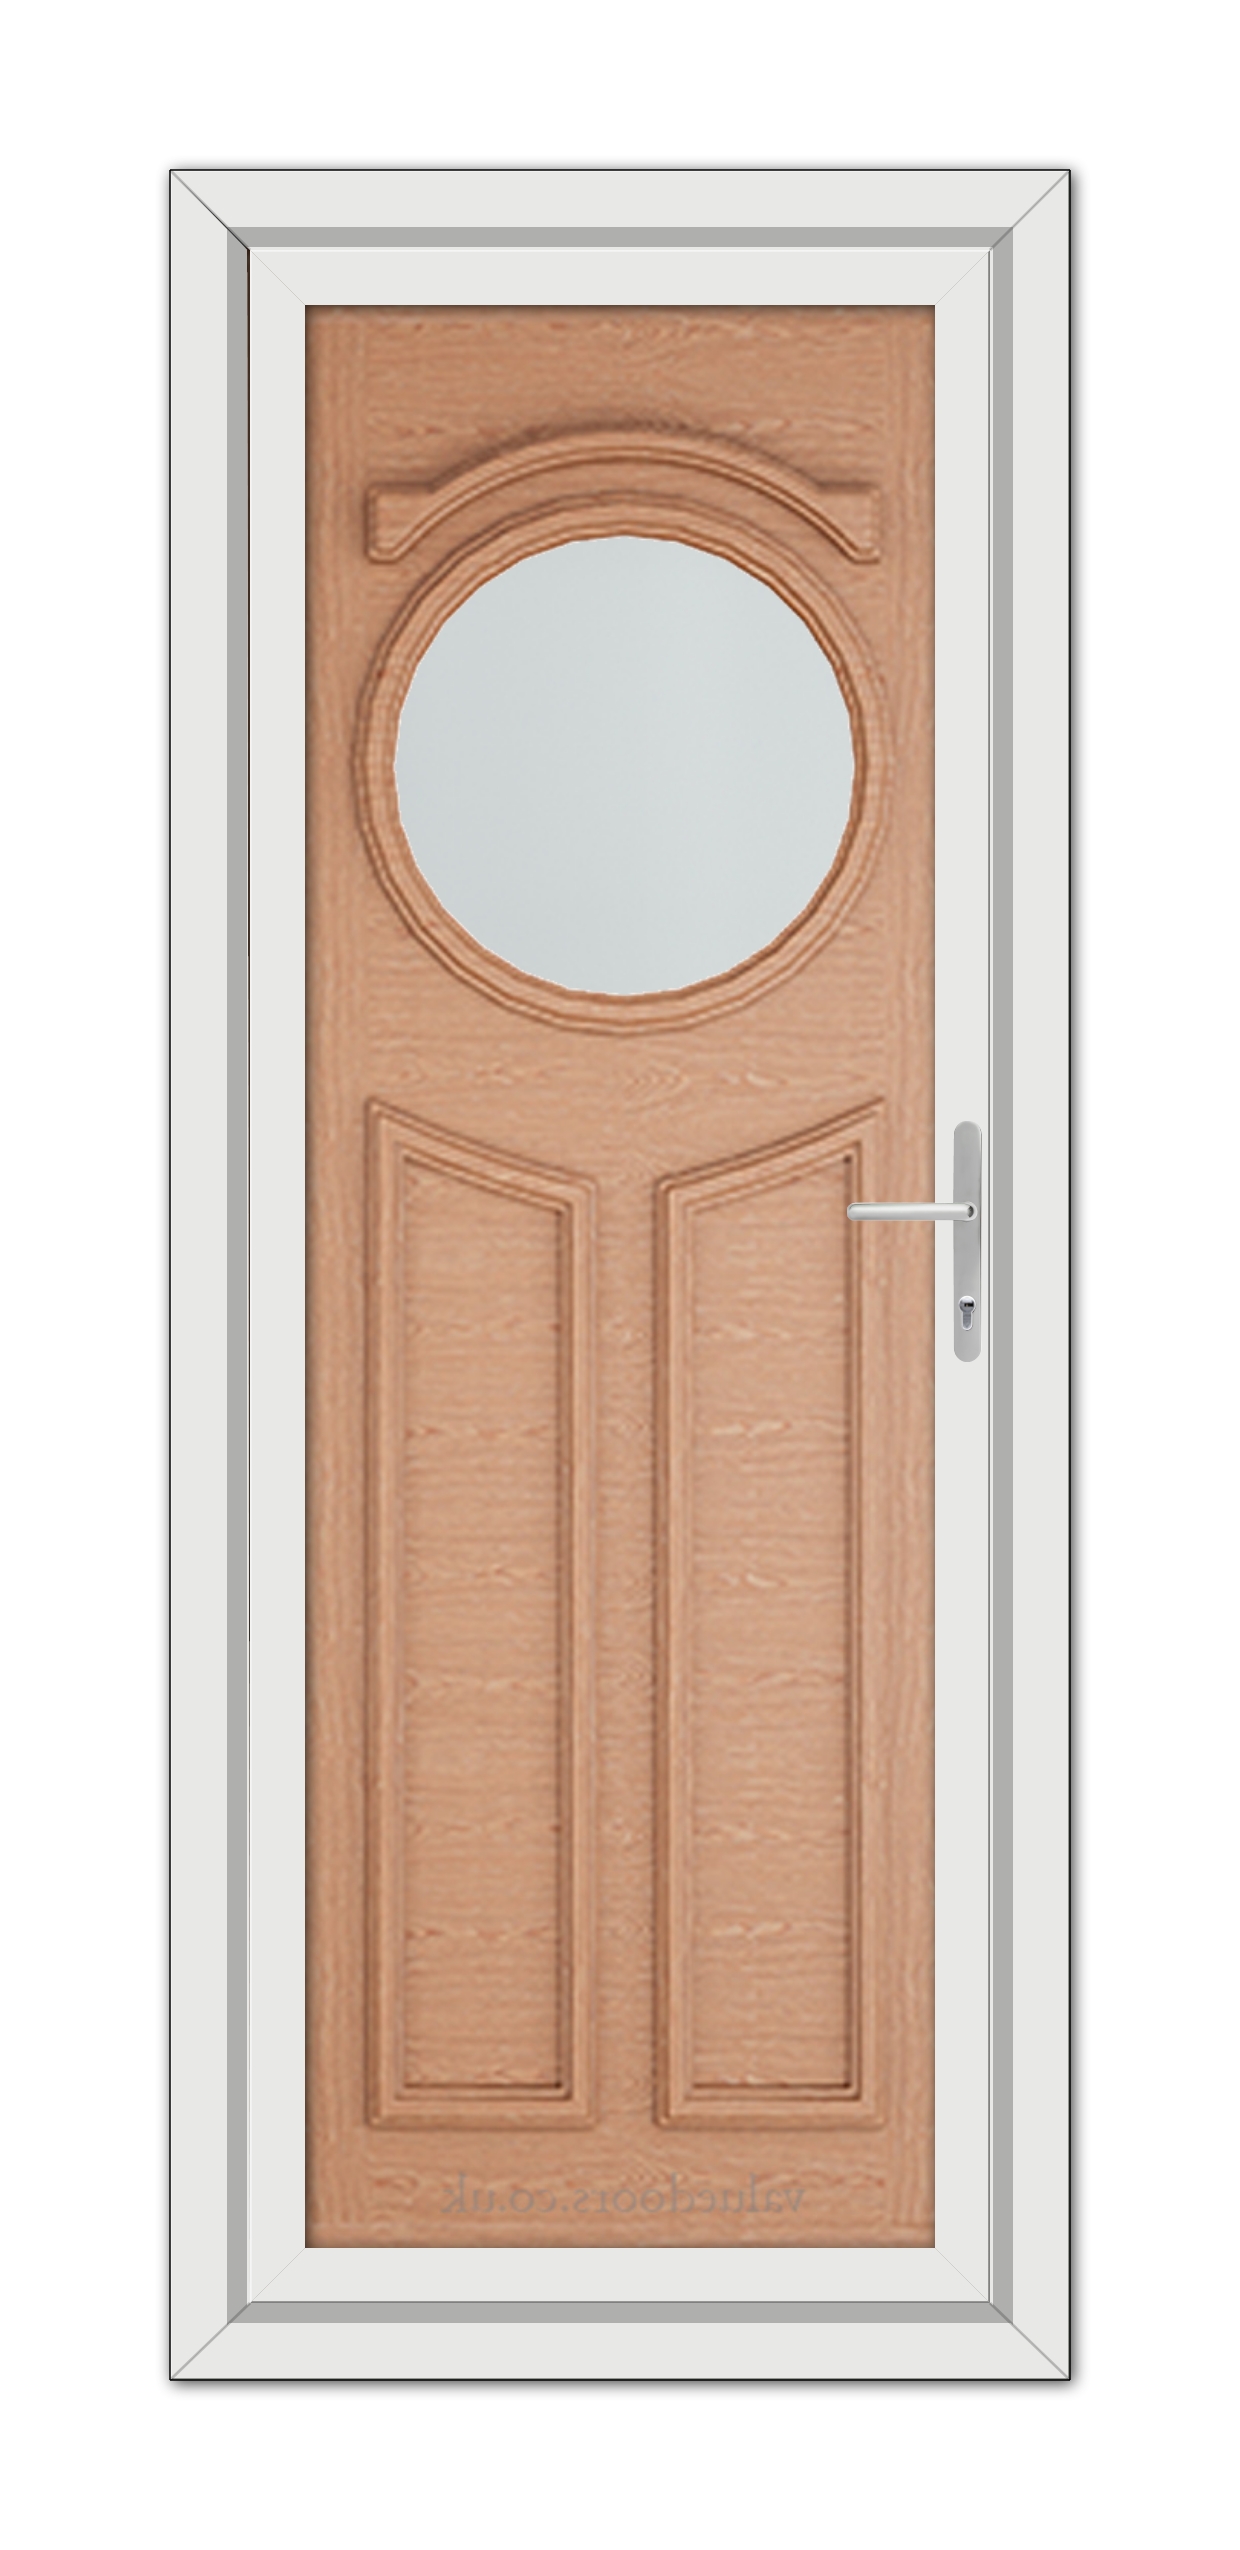 A Irish Oak Blenheim uPVC Door with an oval glass window at the top and a modern handle, framed within a white door frame.